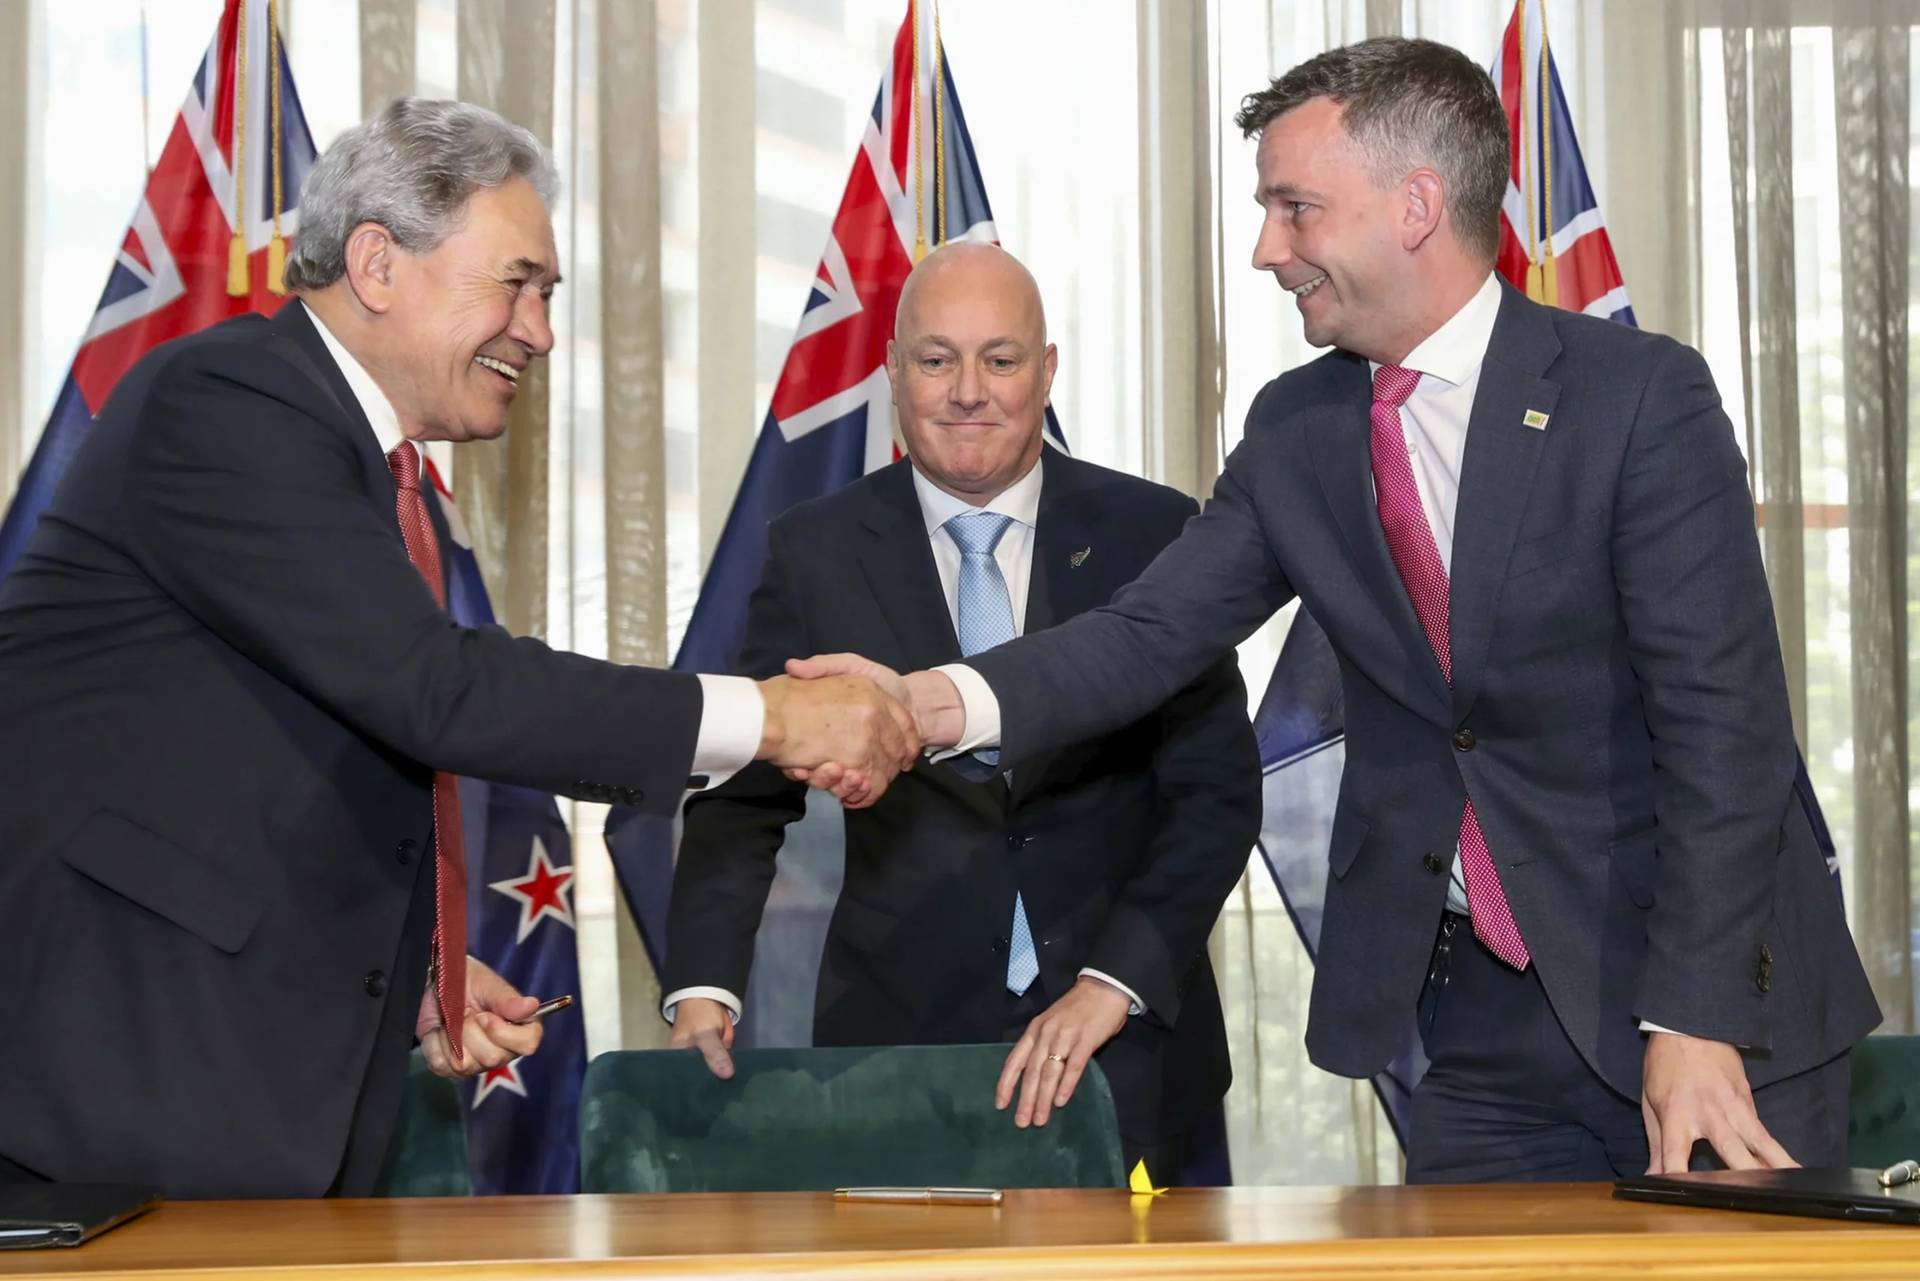 New Zealand Prime Minister elect Christopher Luxon, center, watches as his coalition partners, New Zealand First leader Winston Peters, left, and ACT leader David Seymour shake hands following a signing ceremony in Wellington, New Zealand, Friday, Nov. 24, 2023. The coalition deal ended nearly six weeks of intense negotiations after New Zealand held a general election on Oct. 14. (Credit: Mark Mitchell/NZ Herald via AP.)